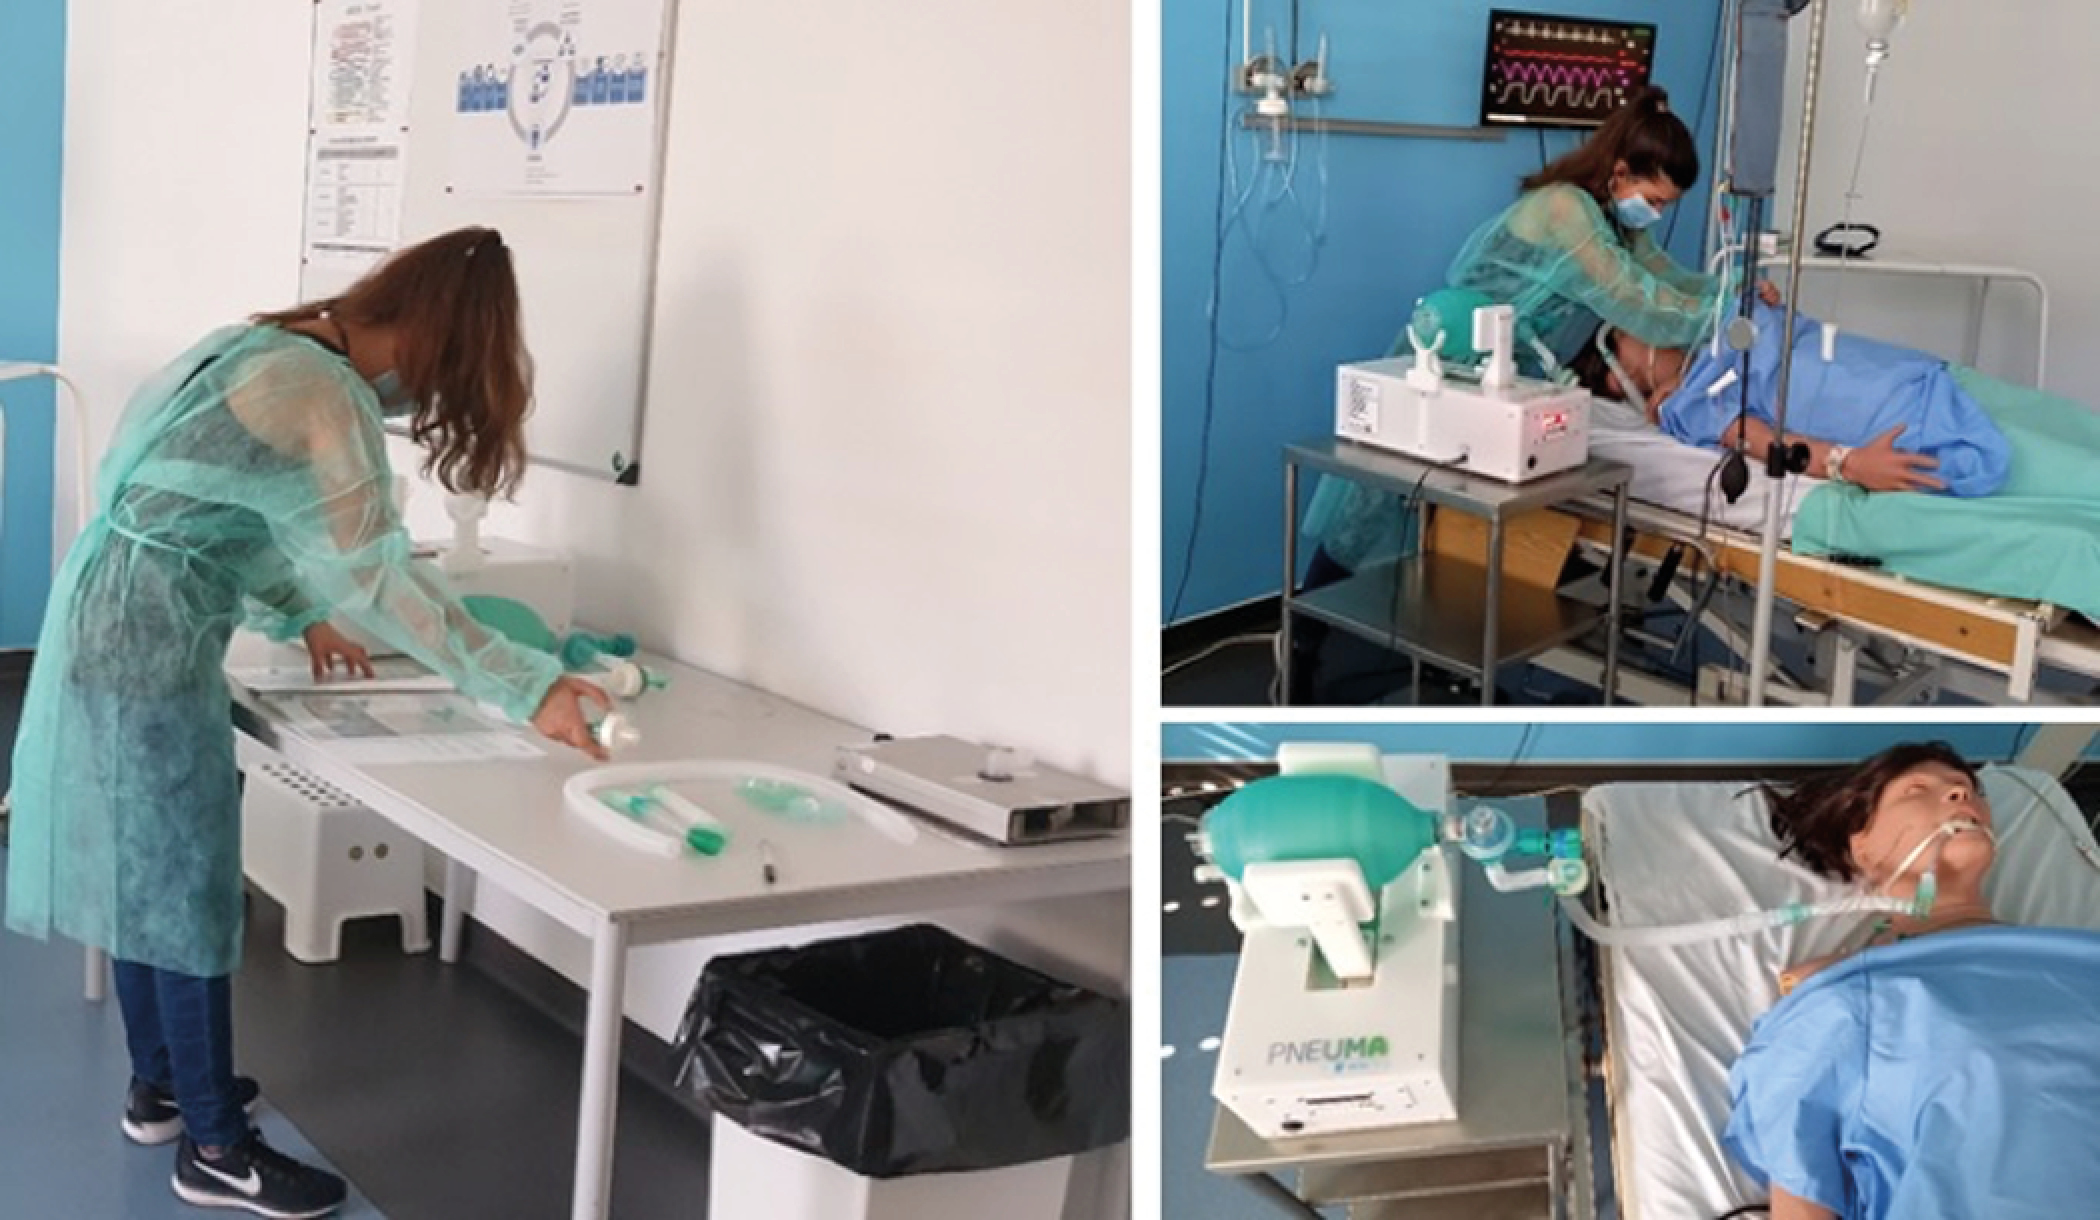 Usability testing. Left panel – assembly of the system (part I); right panel – use of the system in an immersive clinical simulation environment (part II).